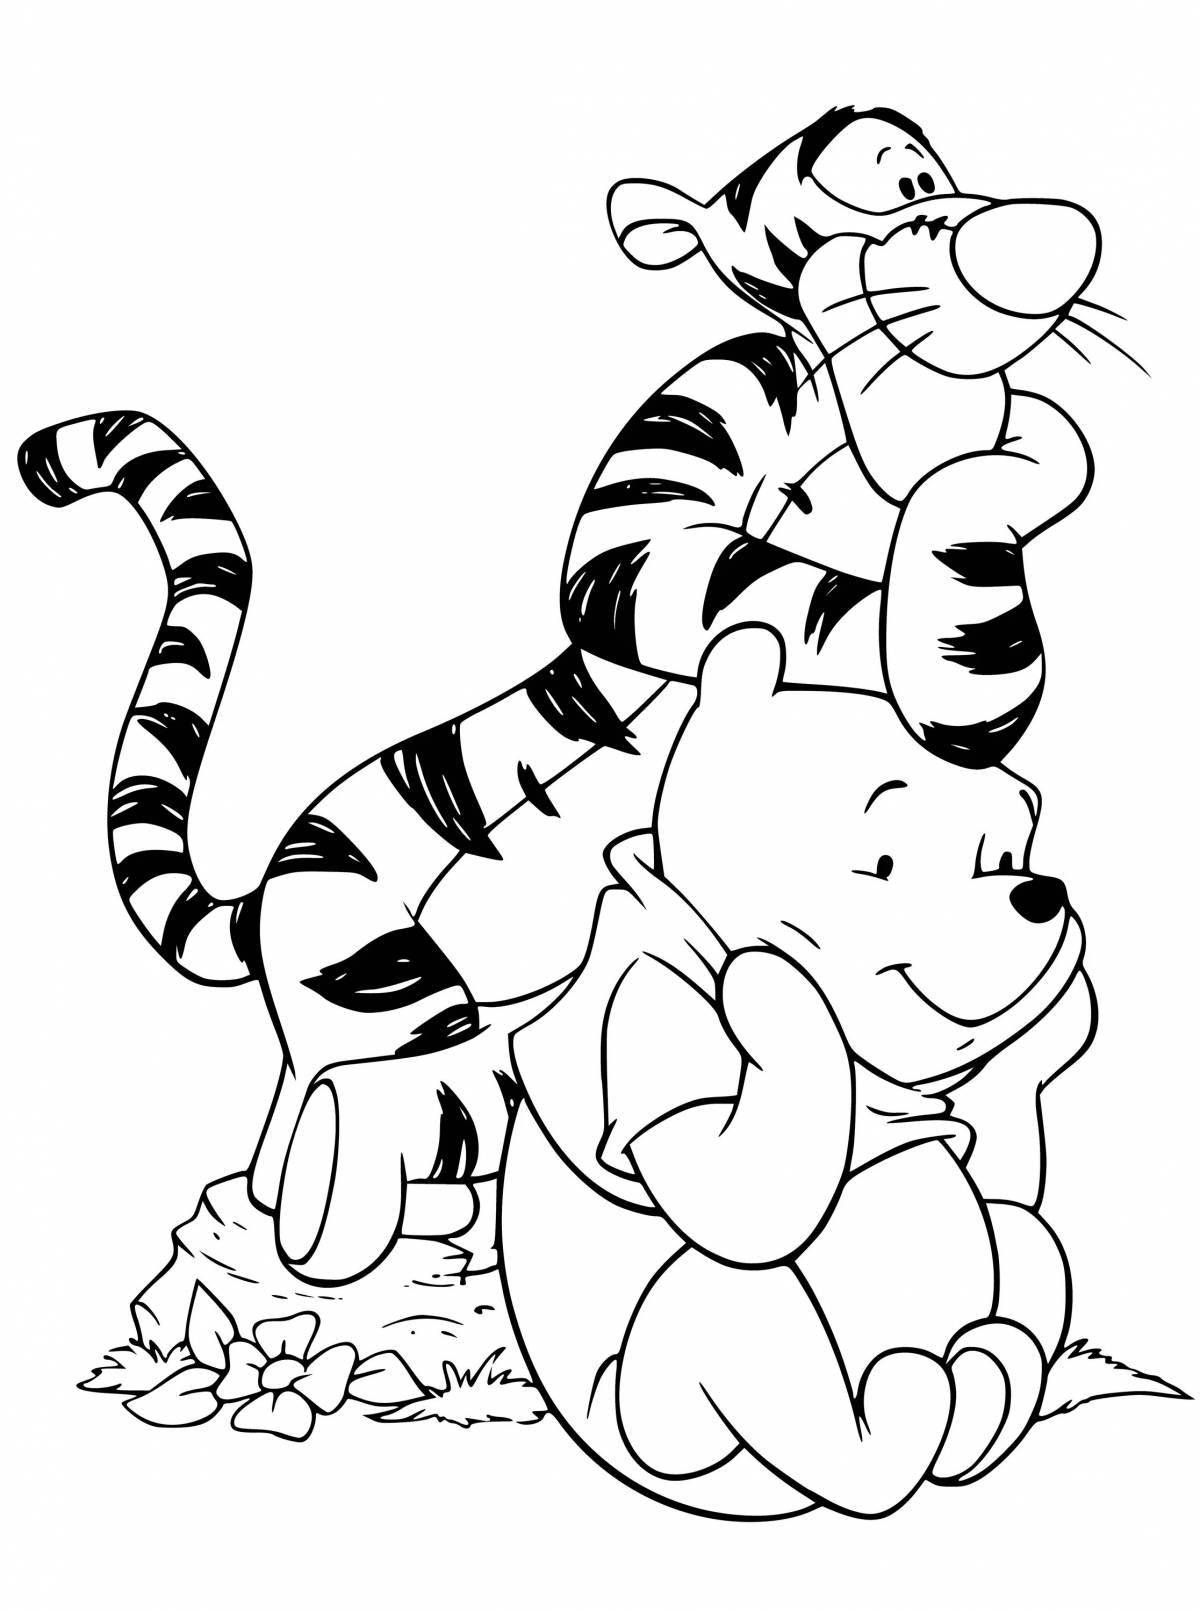 Fun coloring pages with photos